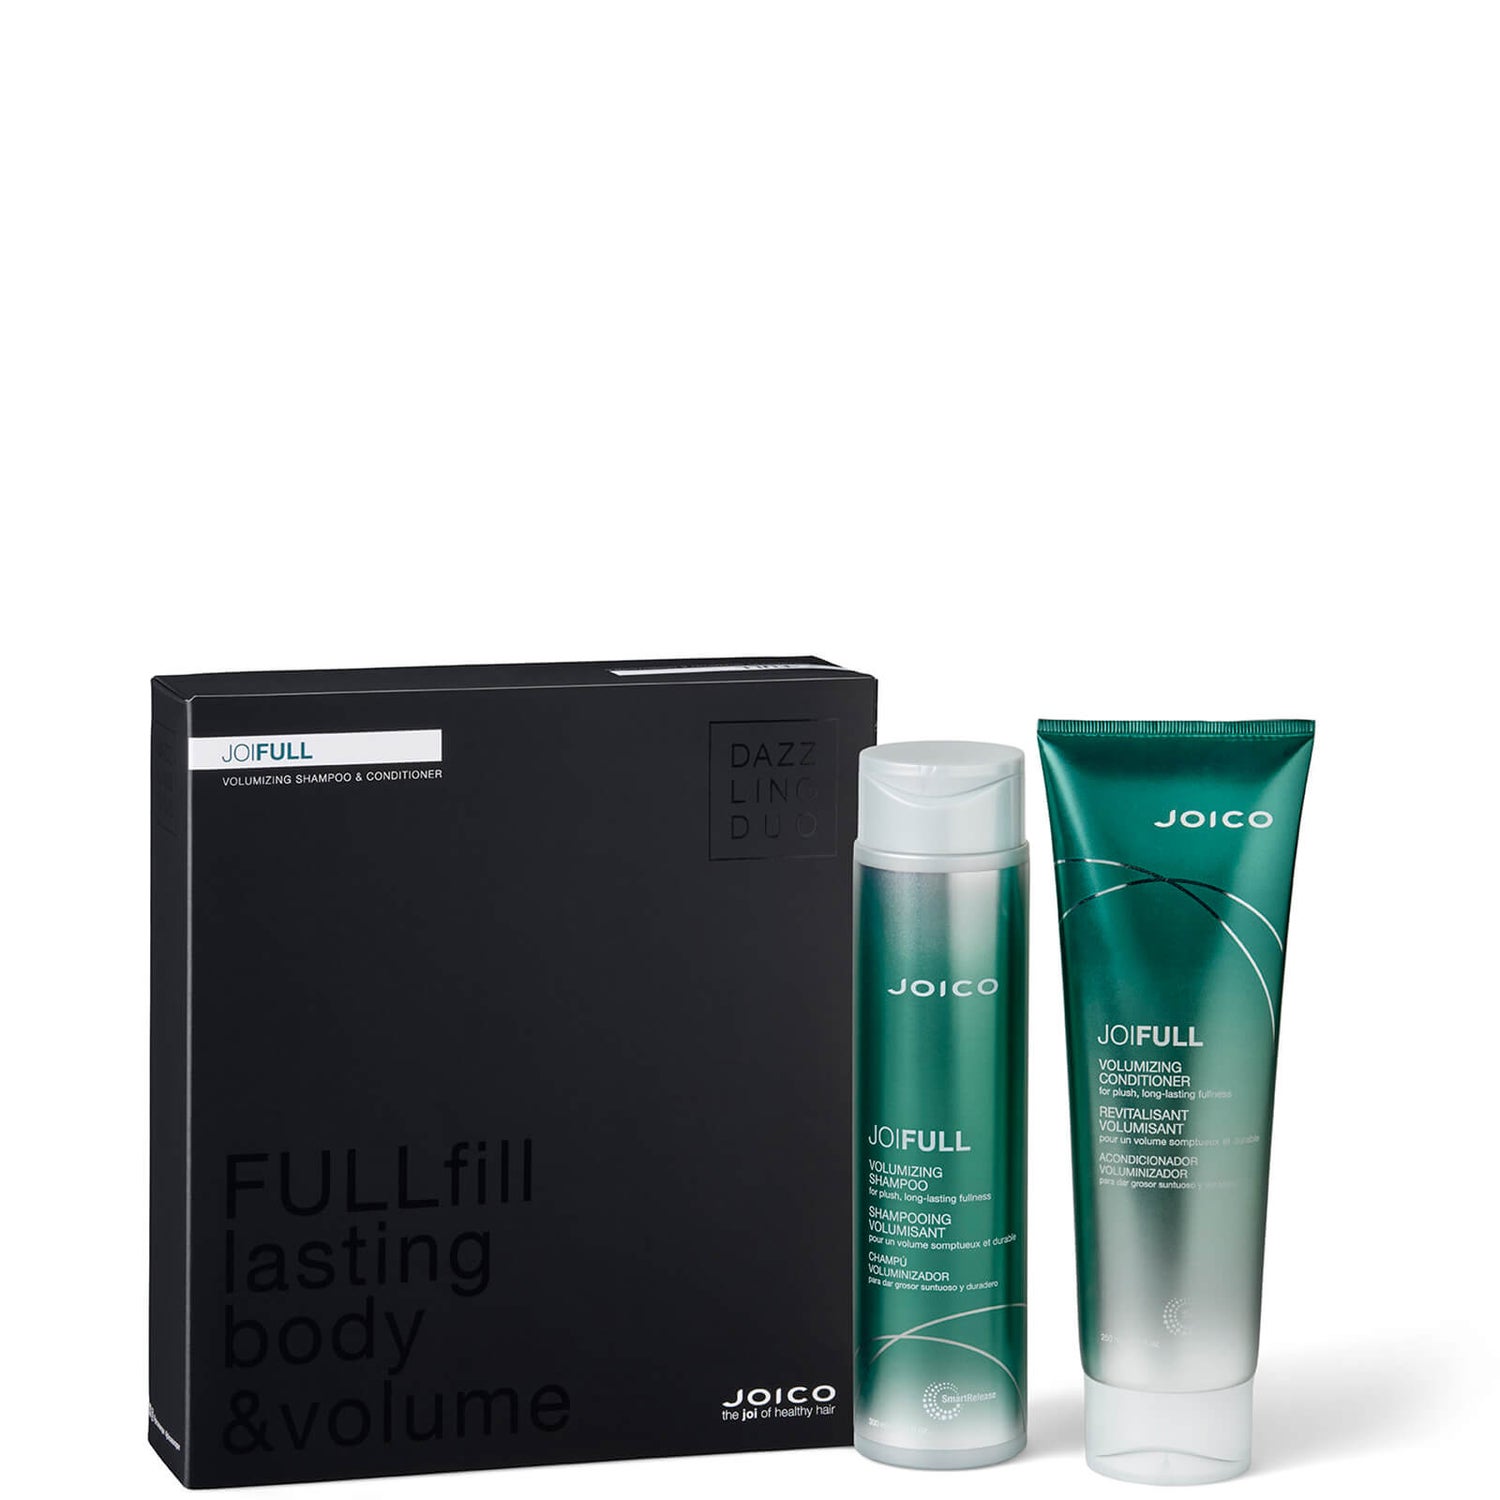 JOICO JoiFull Shampoo and Conditioner Dazzling Duo (Worth £33.40)